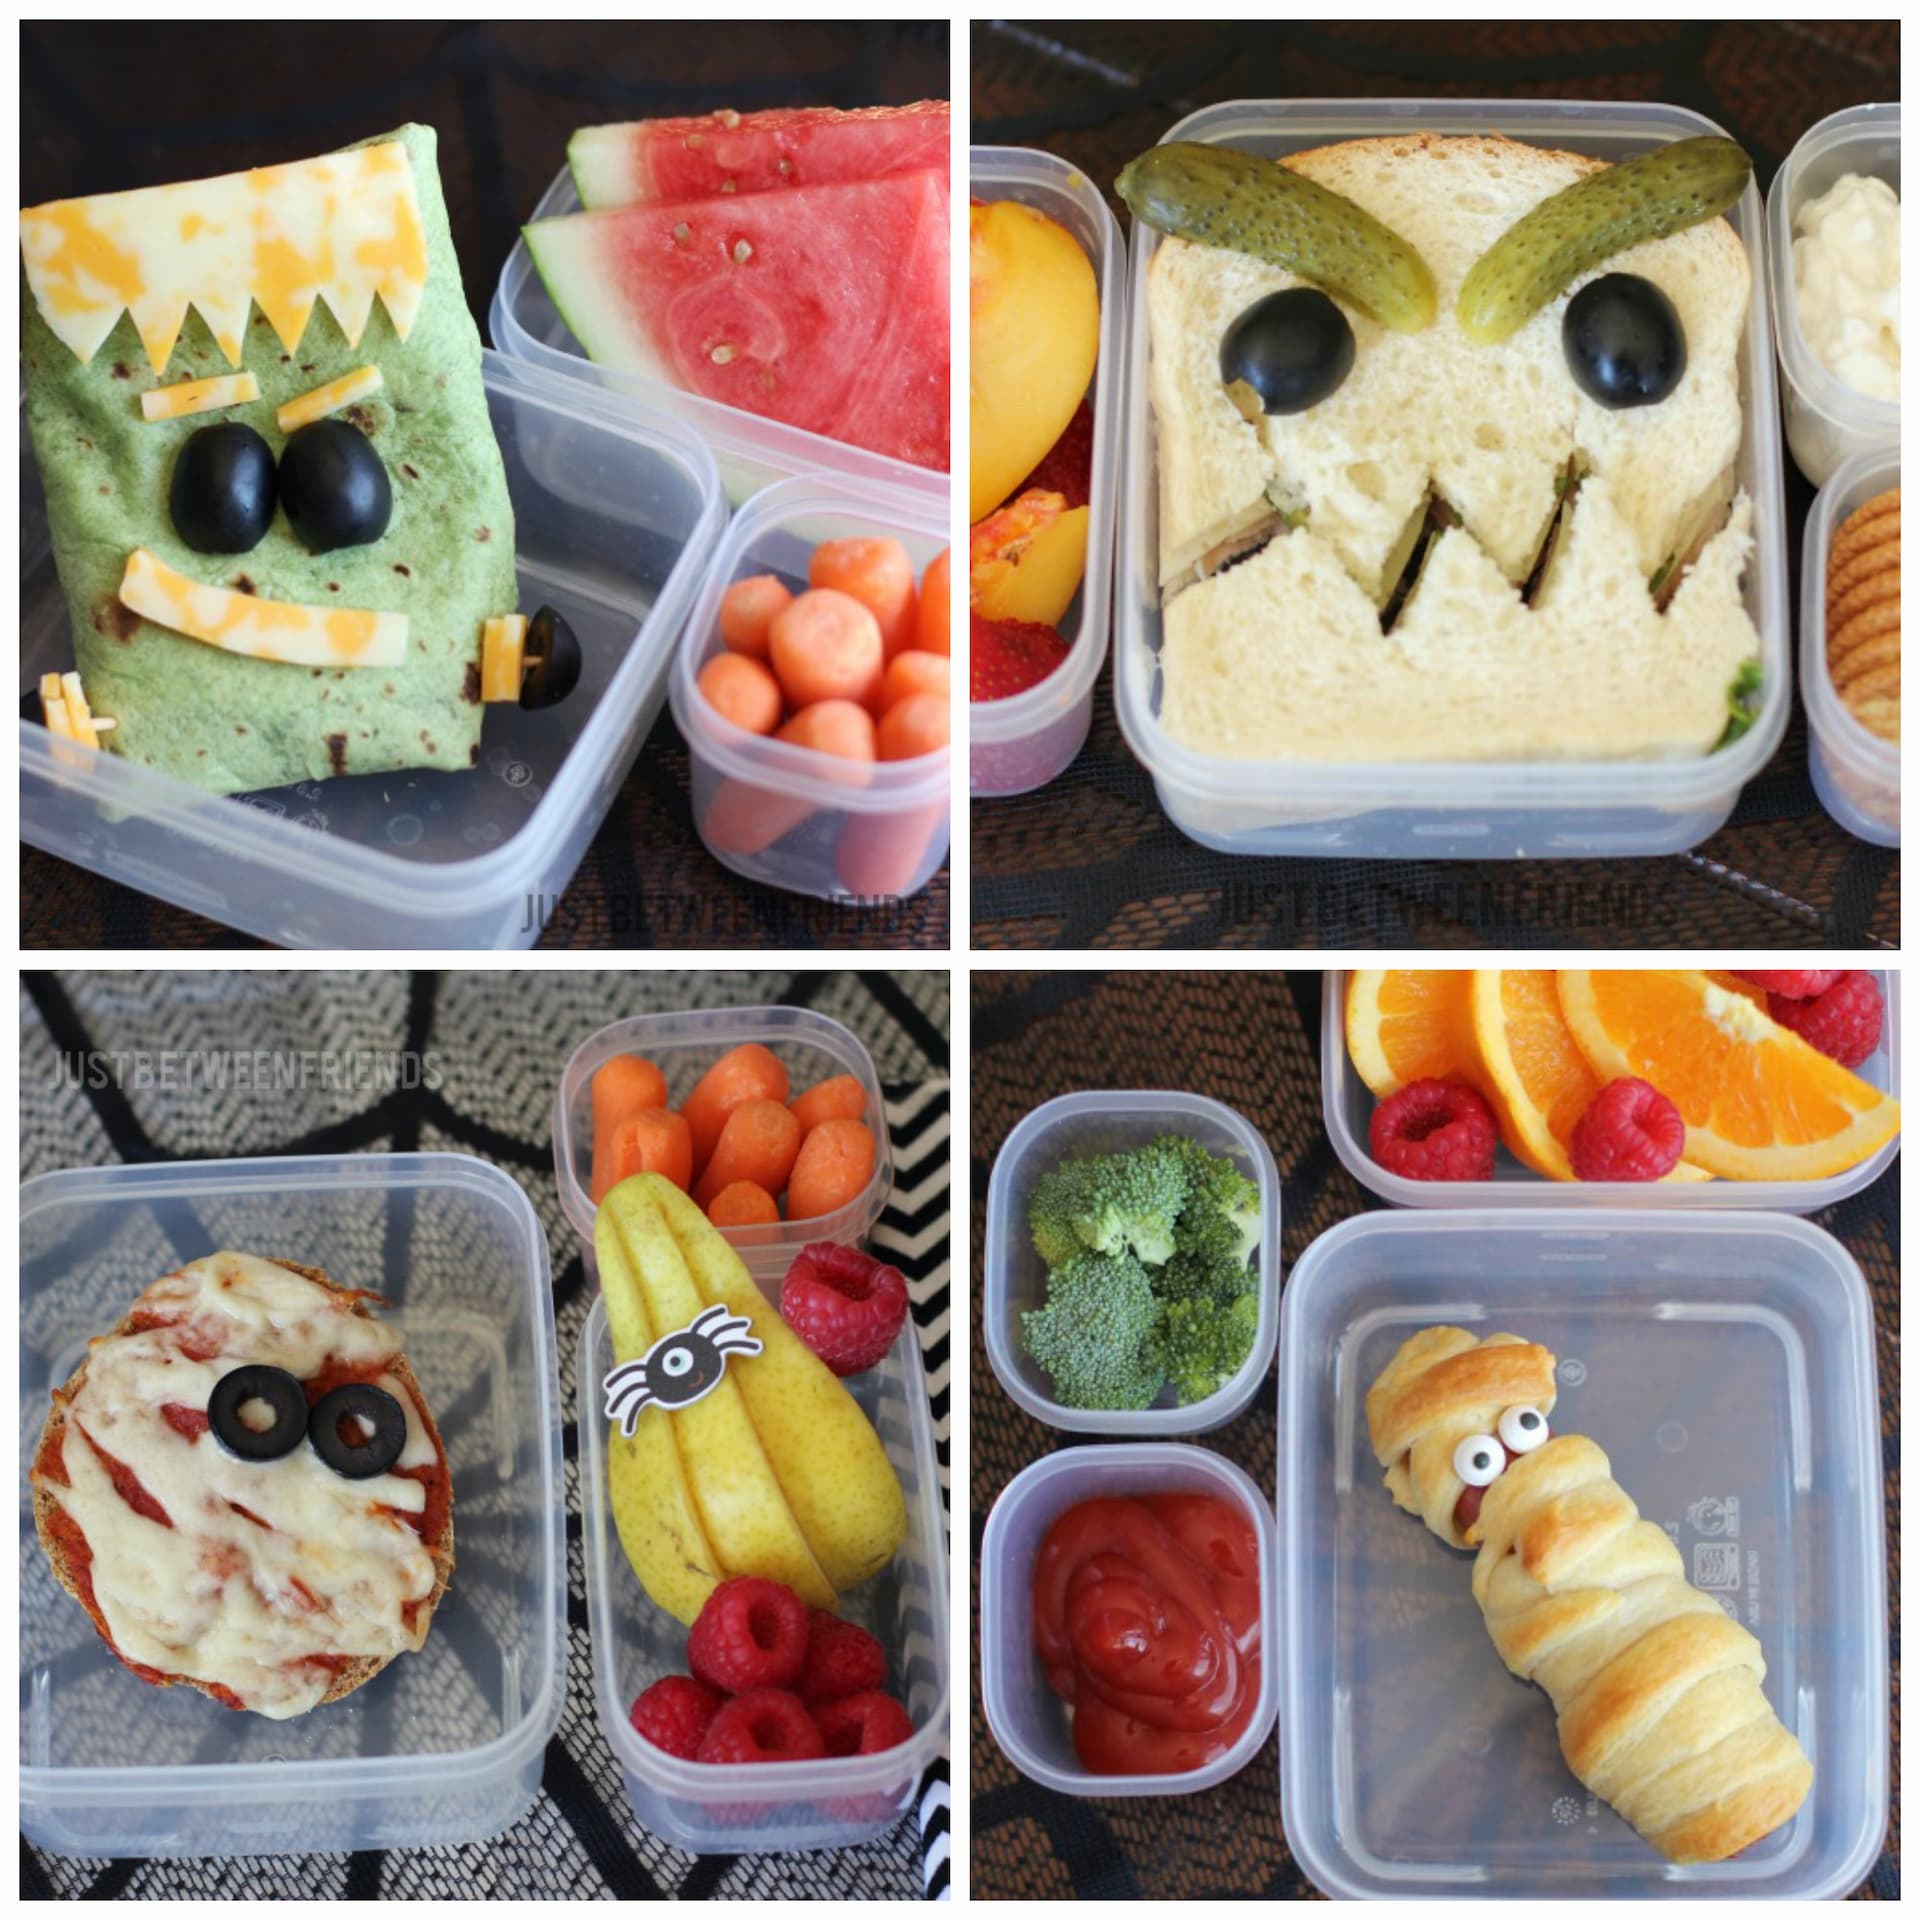 Fun monster-themed lunch ideas for kids